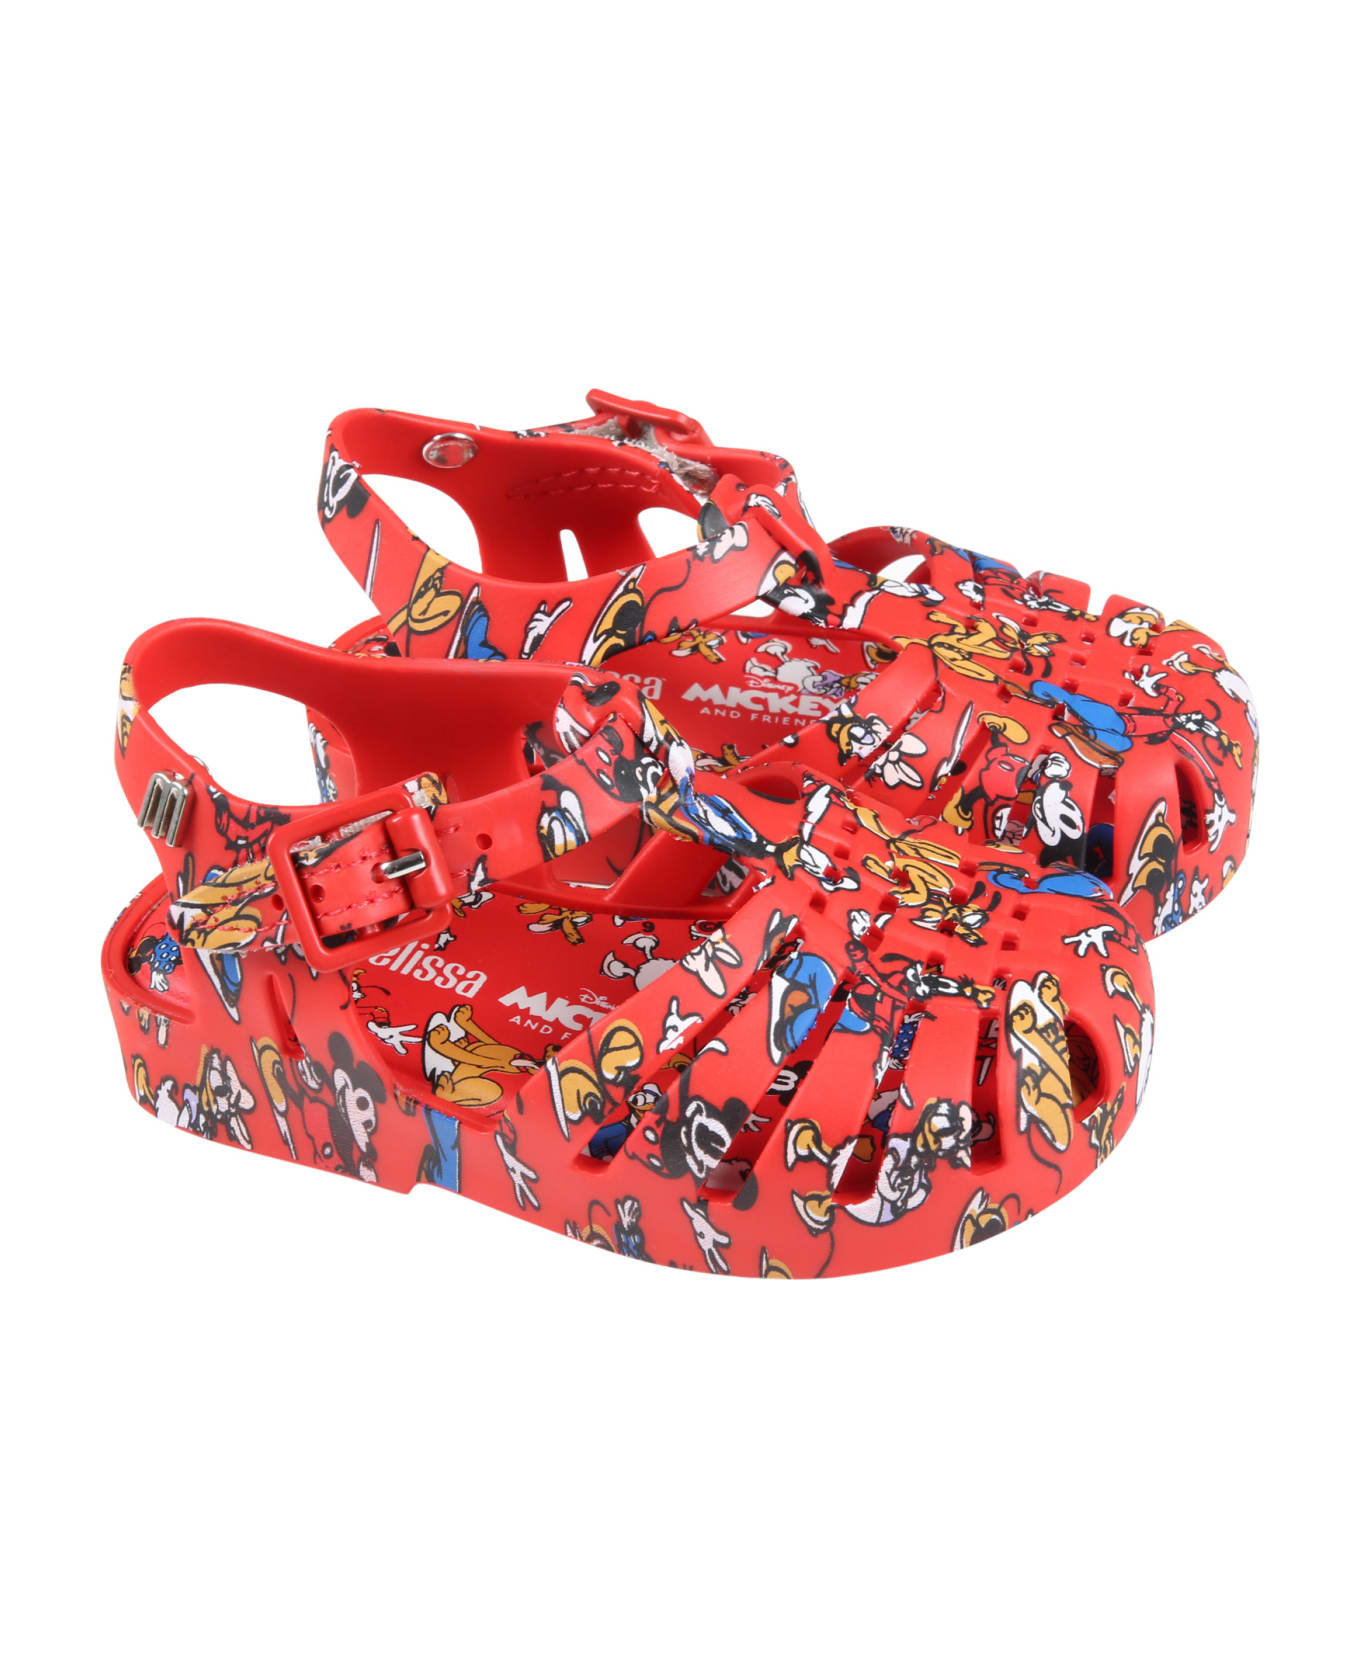 Melissa Red Sandals For Boy With Disney Characters - Red